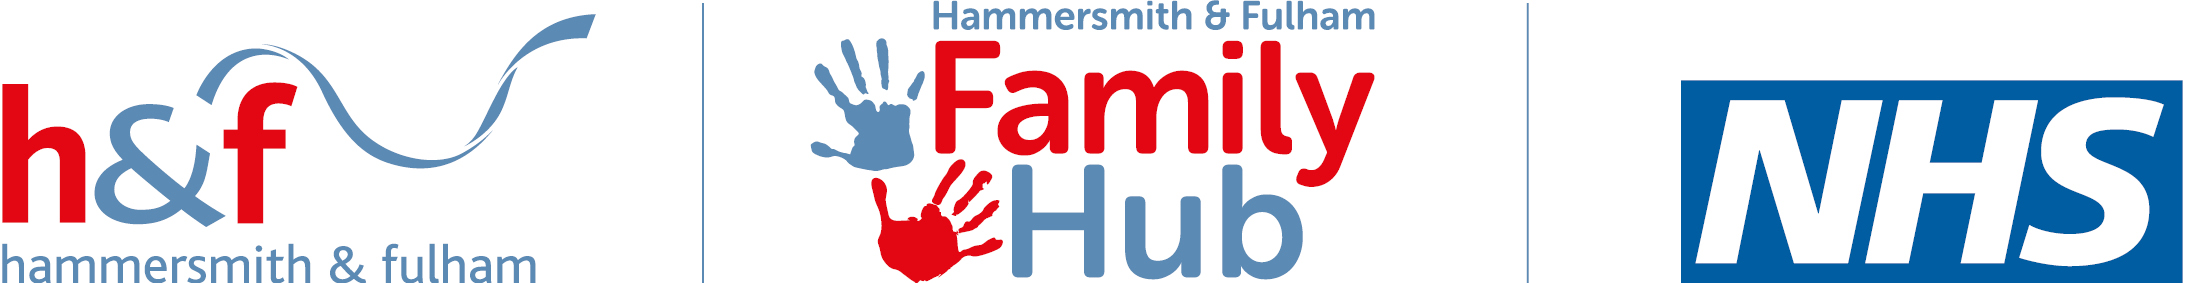 Hammersmith and Fulham Family Hubs